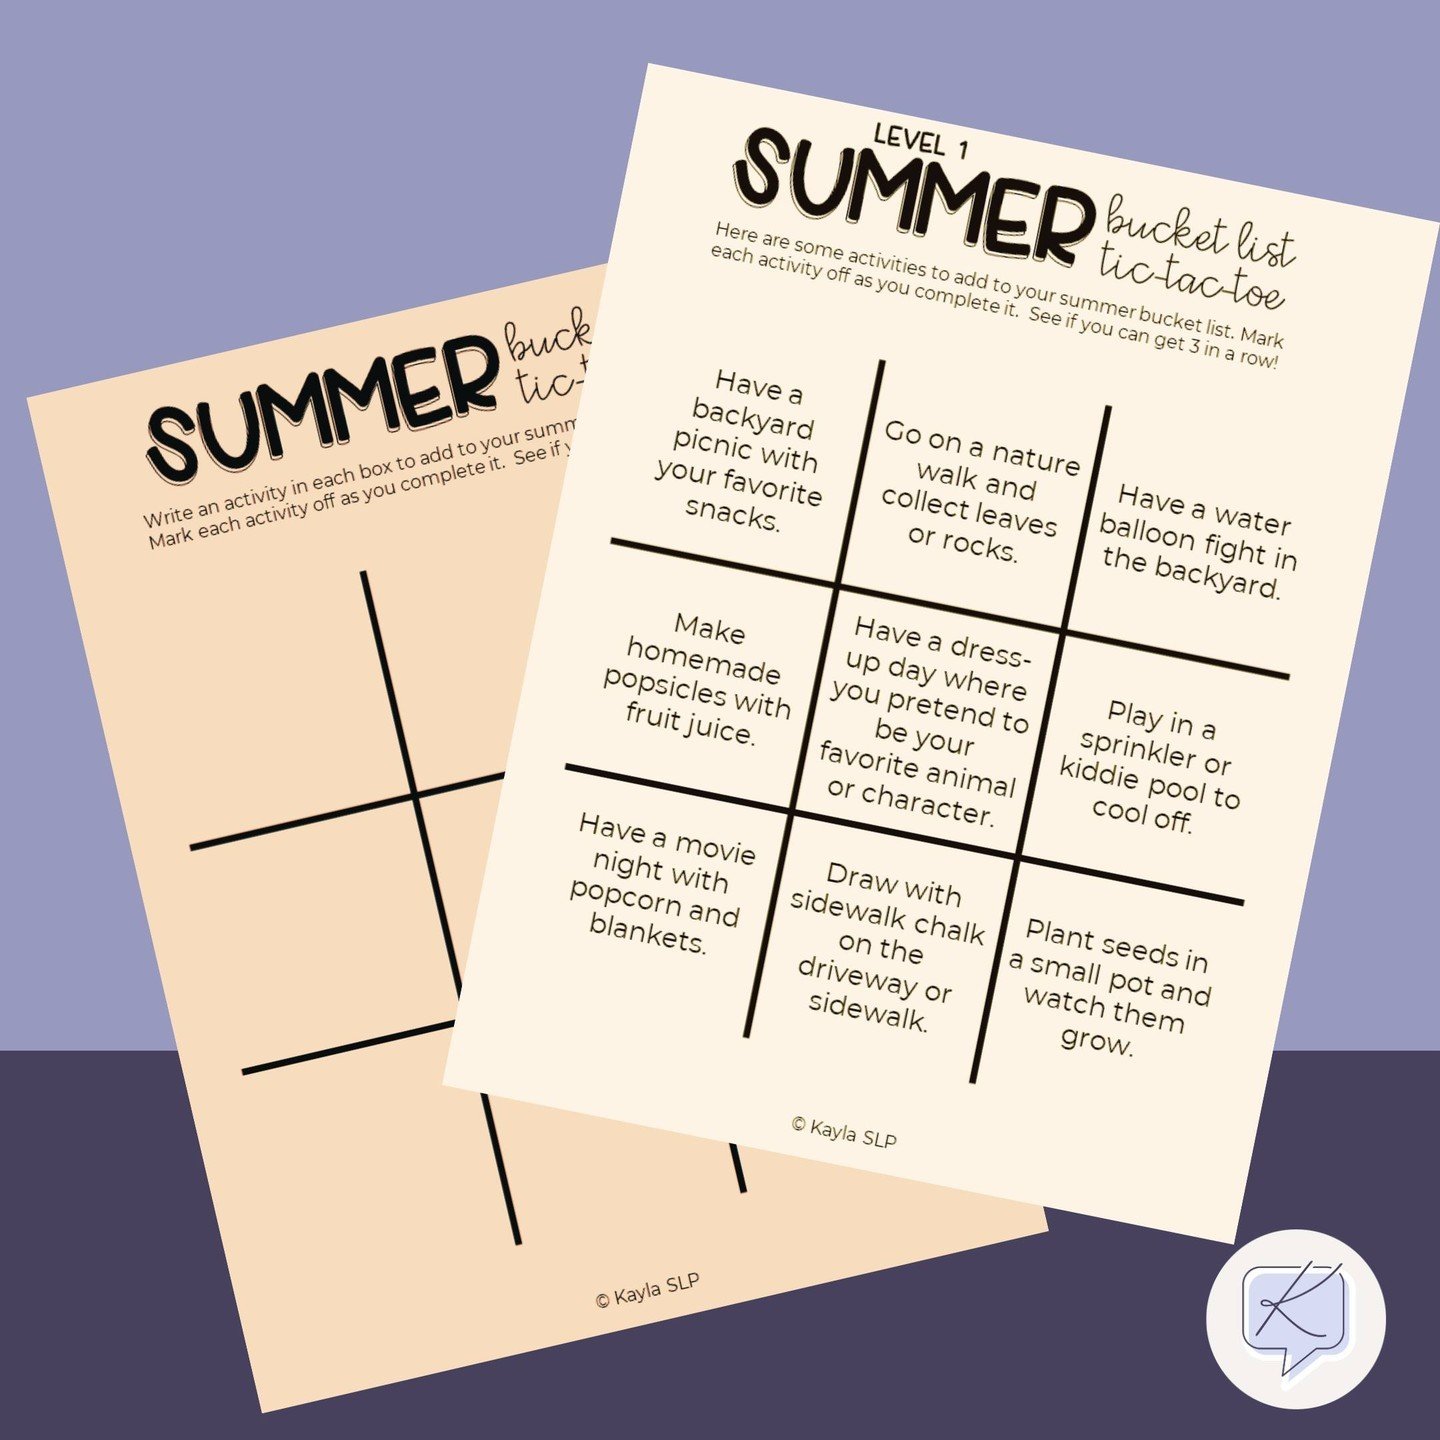 Check out my new summer bucket list tic-tac-toe game! It is a fantastic tool to combat boredom during the break and create lasting memories. Take advantage of this opportunity to transform your summer into an incredible adventure by subscribing today